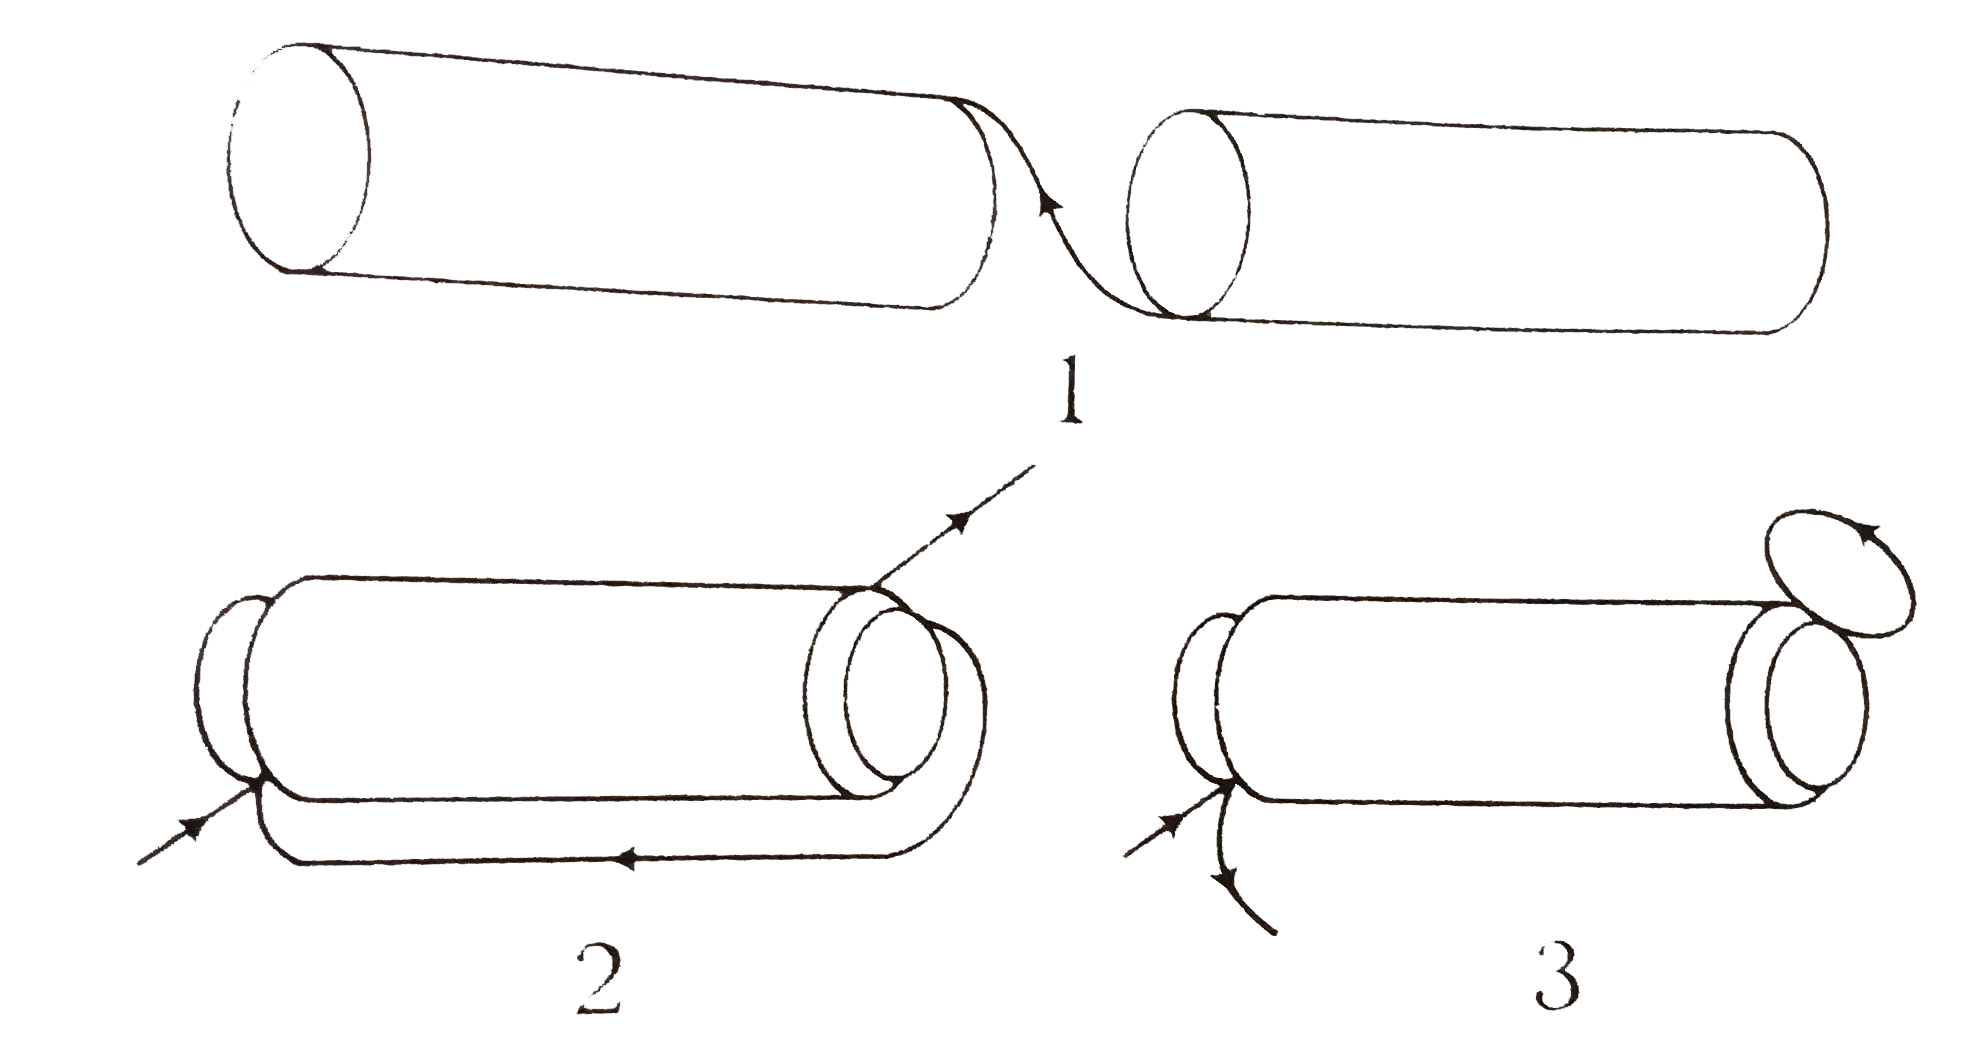 There are two solenoid of same length and inductance L but their diameters differ to the extent that one can just fit into the other. They are connected in three different ways in series.   (1) They are connected in series but separated by large distance.   (2) They are connected in series with one inside the other and senses of the turns coinciding.   (3) Both are connected in series with one inside the other with senses of the turns opposites,    as depicted in figures 1, 2 and 3 respectively. The total inductance of the solenoids in each of the case 1, 2 and 3 are respectively.